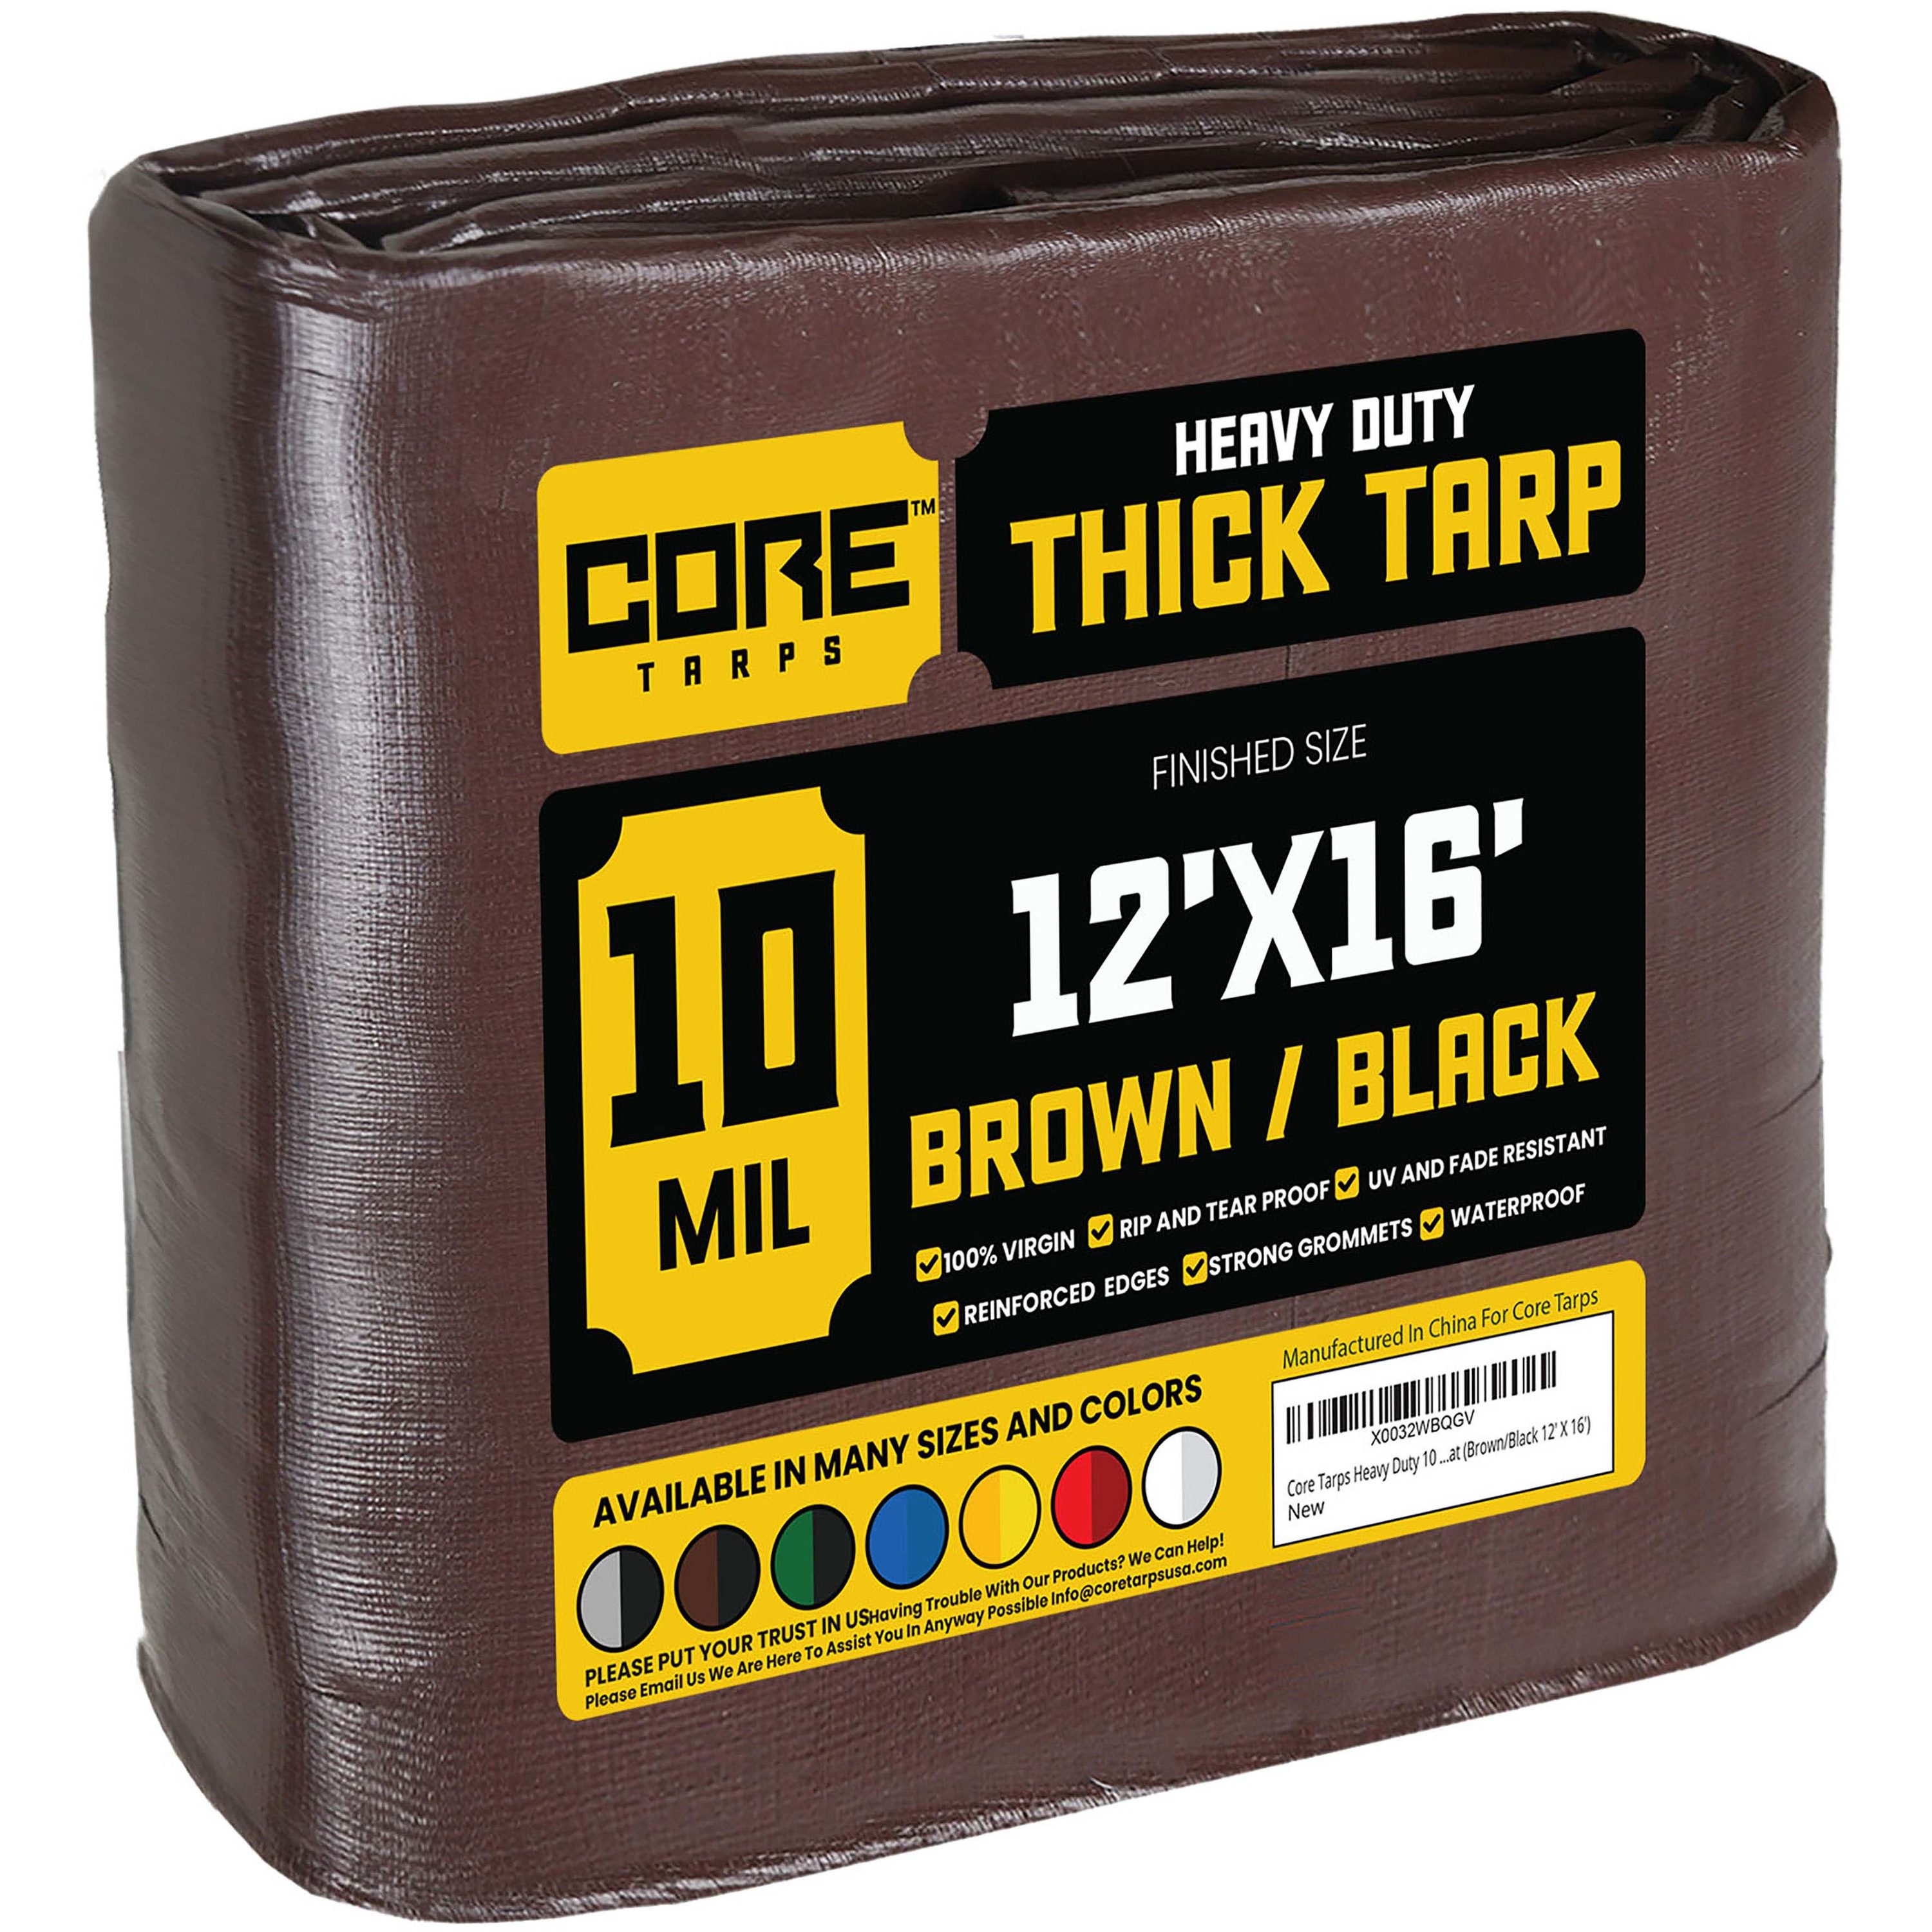 12-16 Gallon 6 Micron Natural 24 x 33 High Density Coreless Roll Can Liners  1000/Ct - Coast Brothers